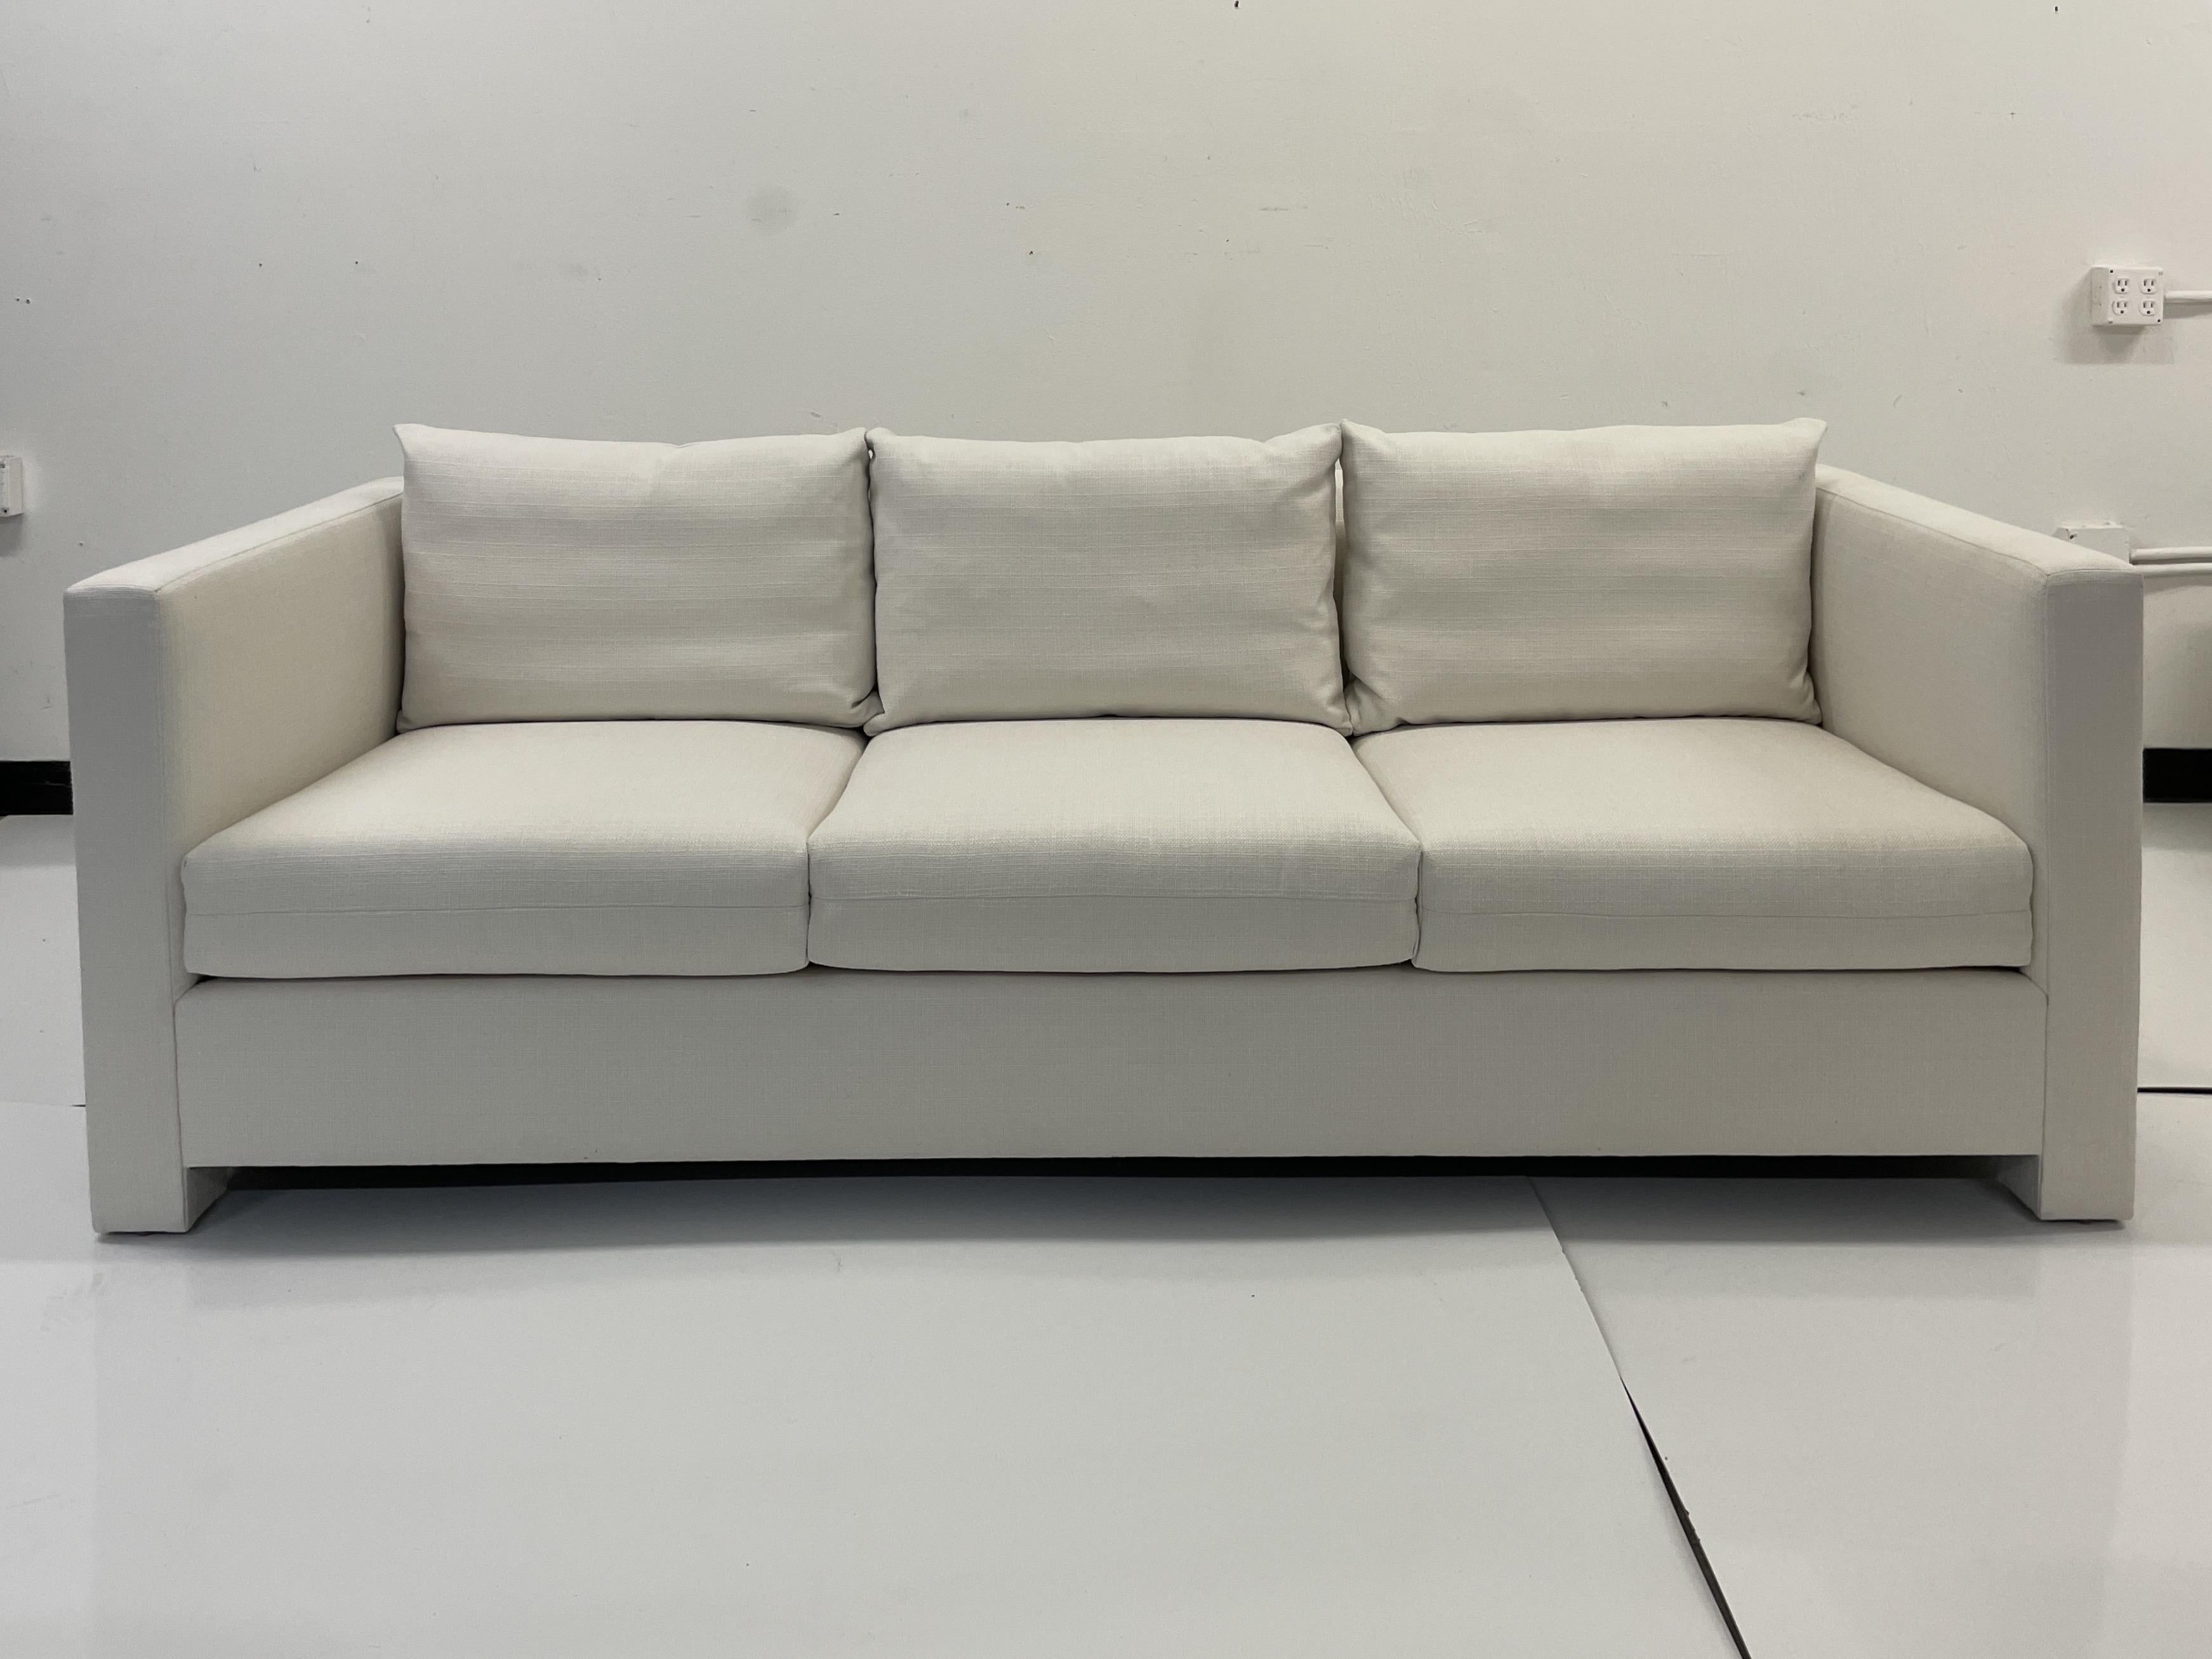 Classic Modern Details with fabulous tailoring designed by Todd Hase. Add some Modern Elements to your Living Space. This Classic Sofa will work well with many styles of interiors and is upholstered in Todd Hase Textiles High Performance Off White .